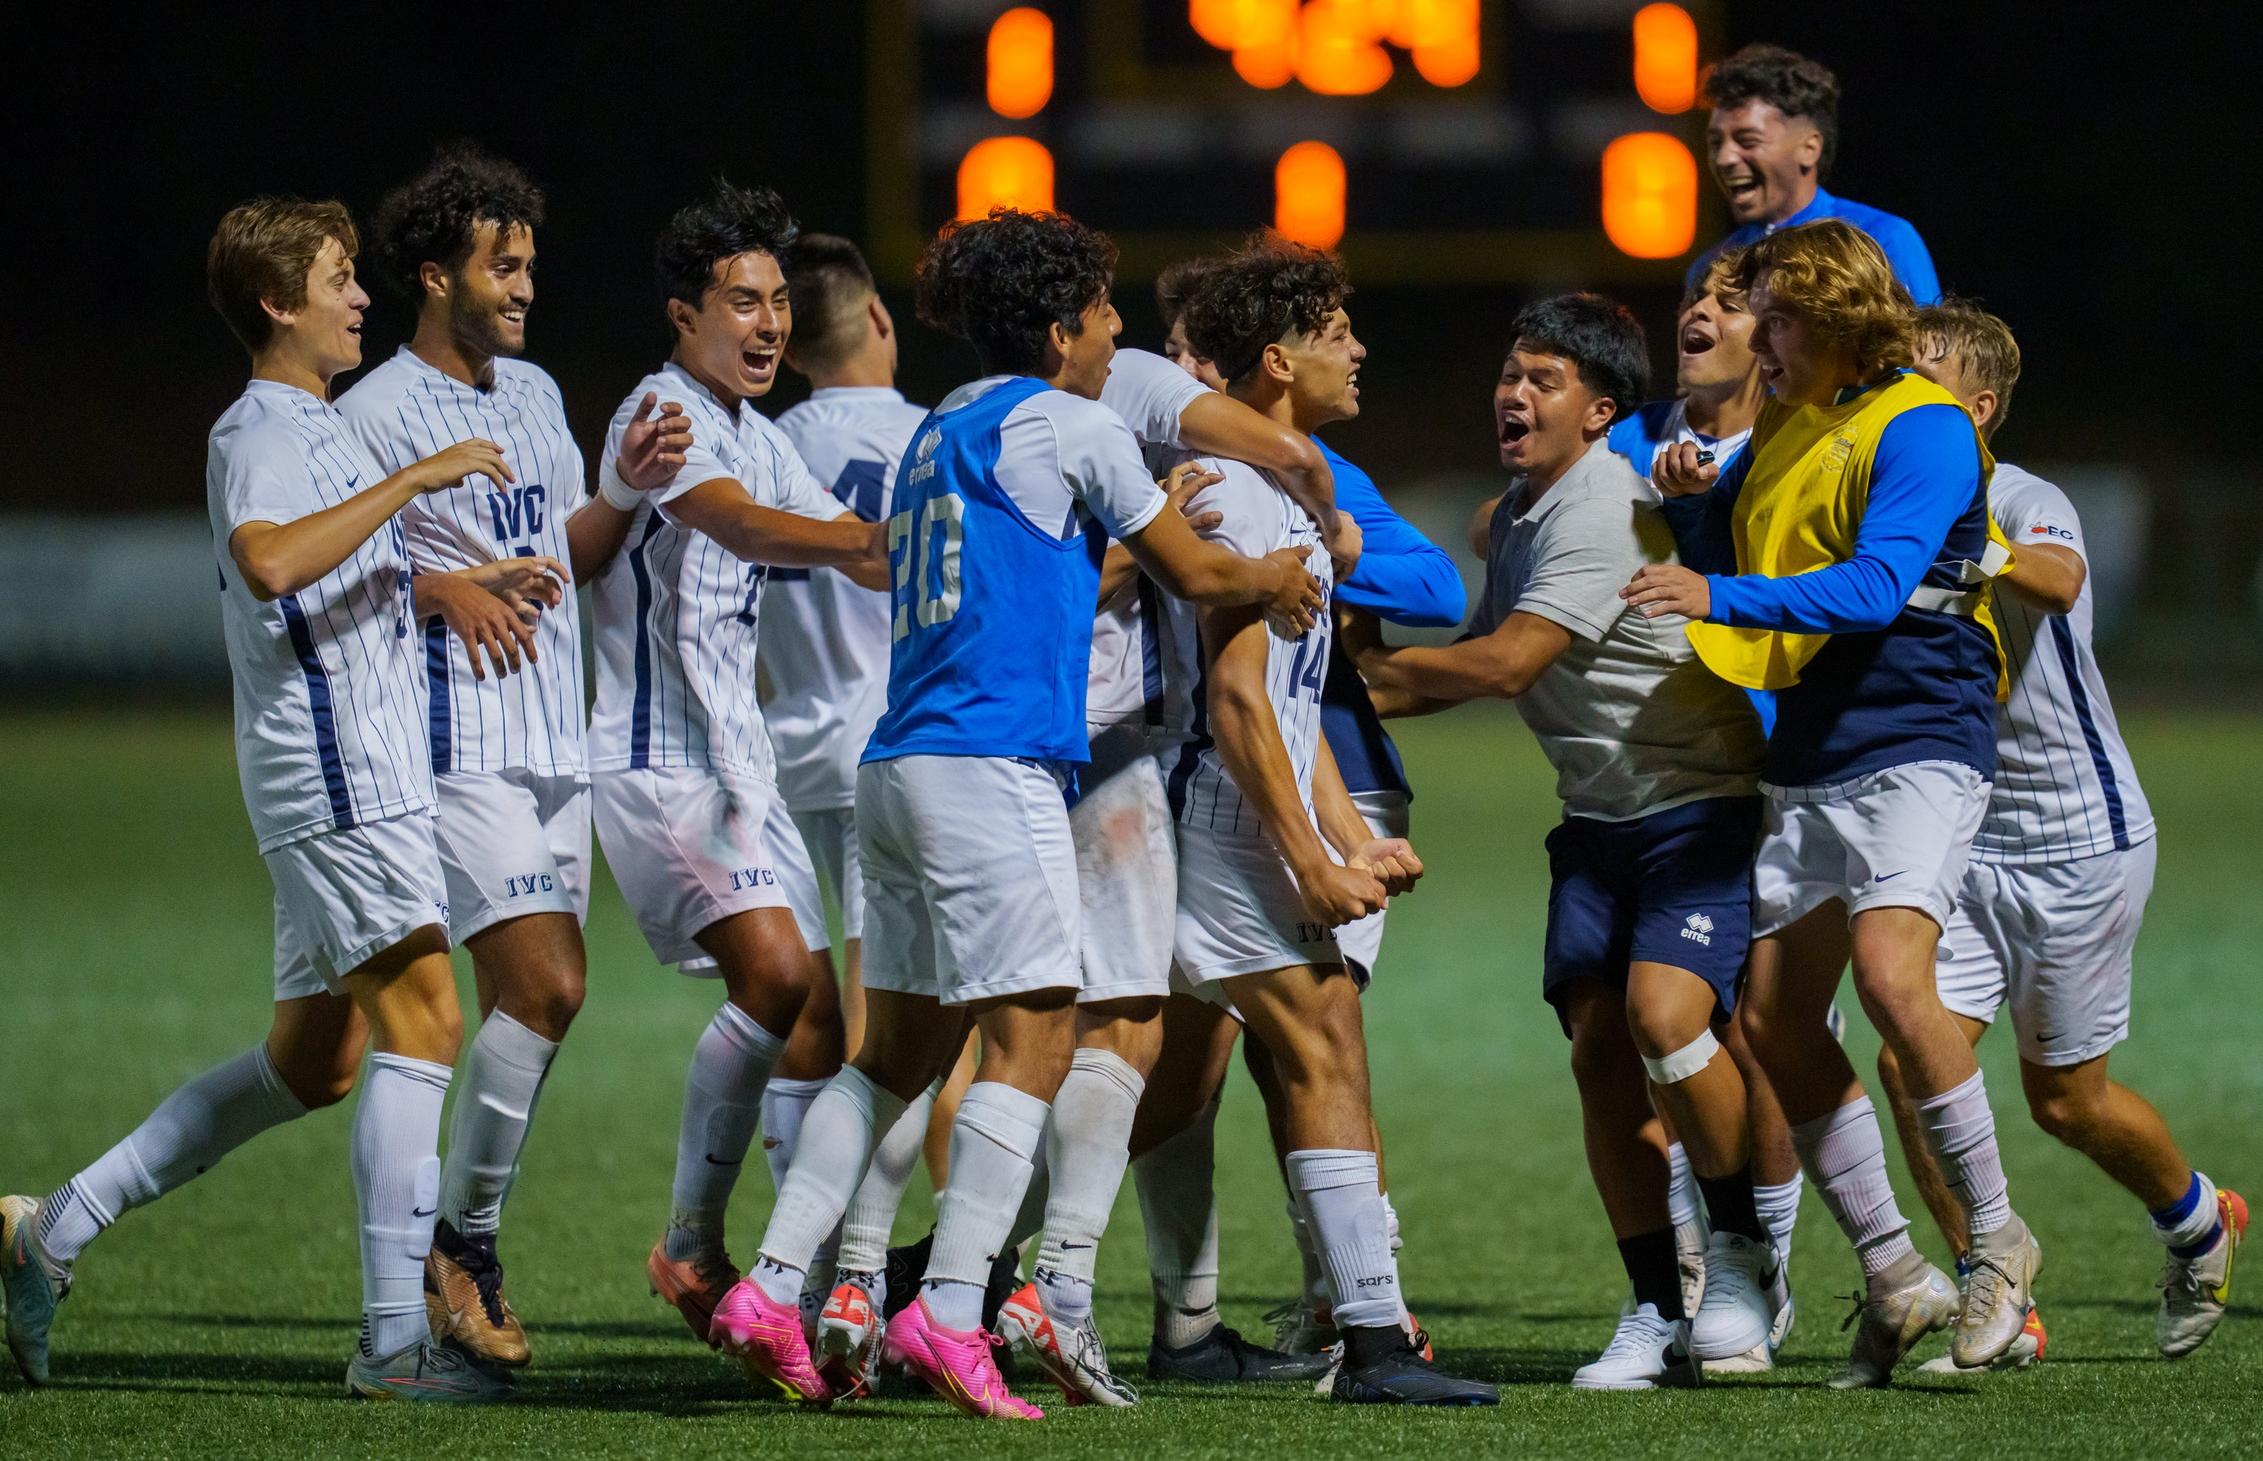 Soccer team ranked 15th in the nation, plays at Fullerton Friday